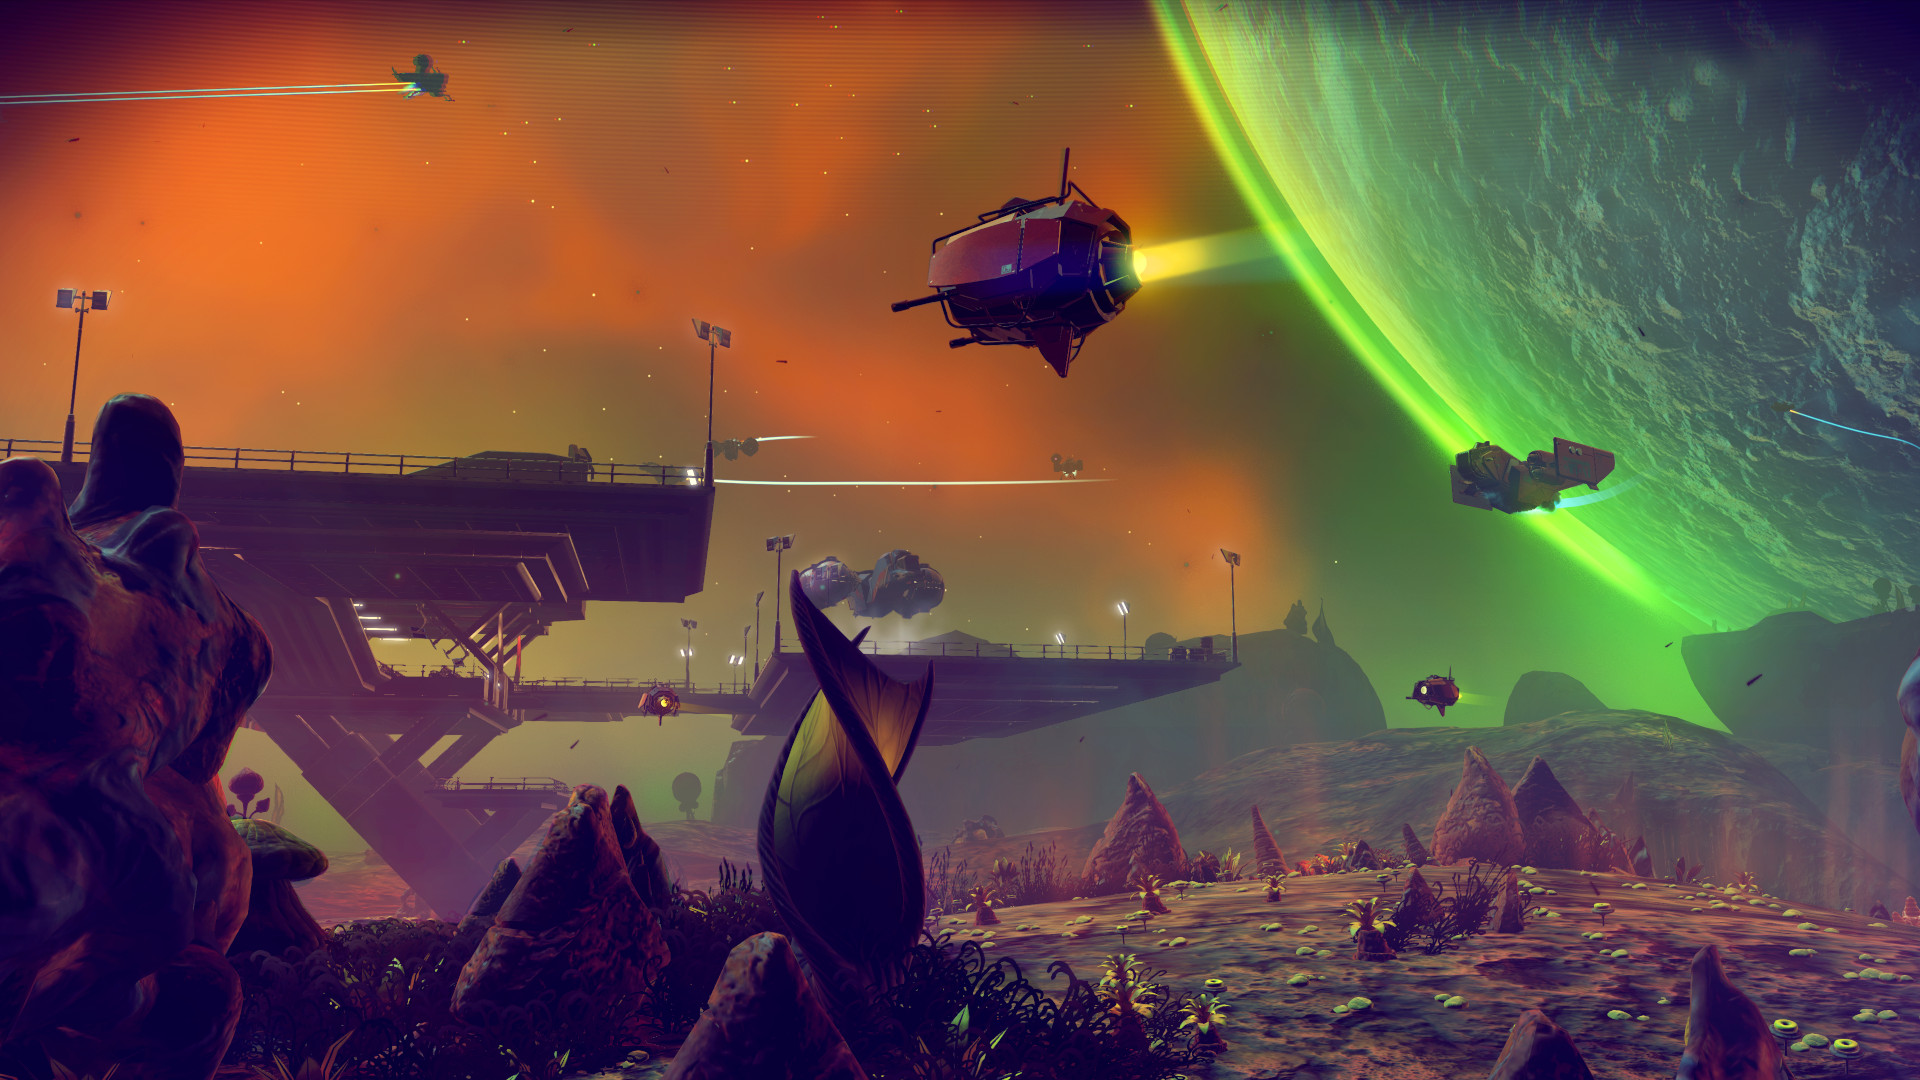 Best Xbox Game Pass games: An alien planet's surface in No Man's Sky, with drones flying past.